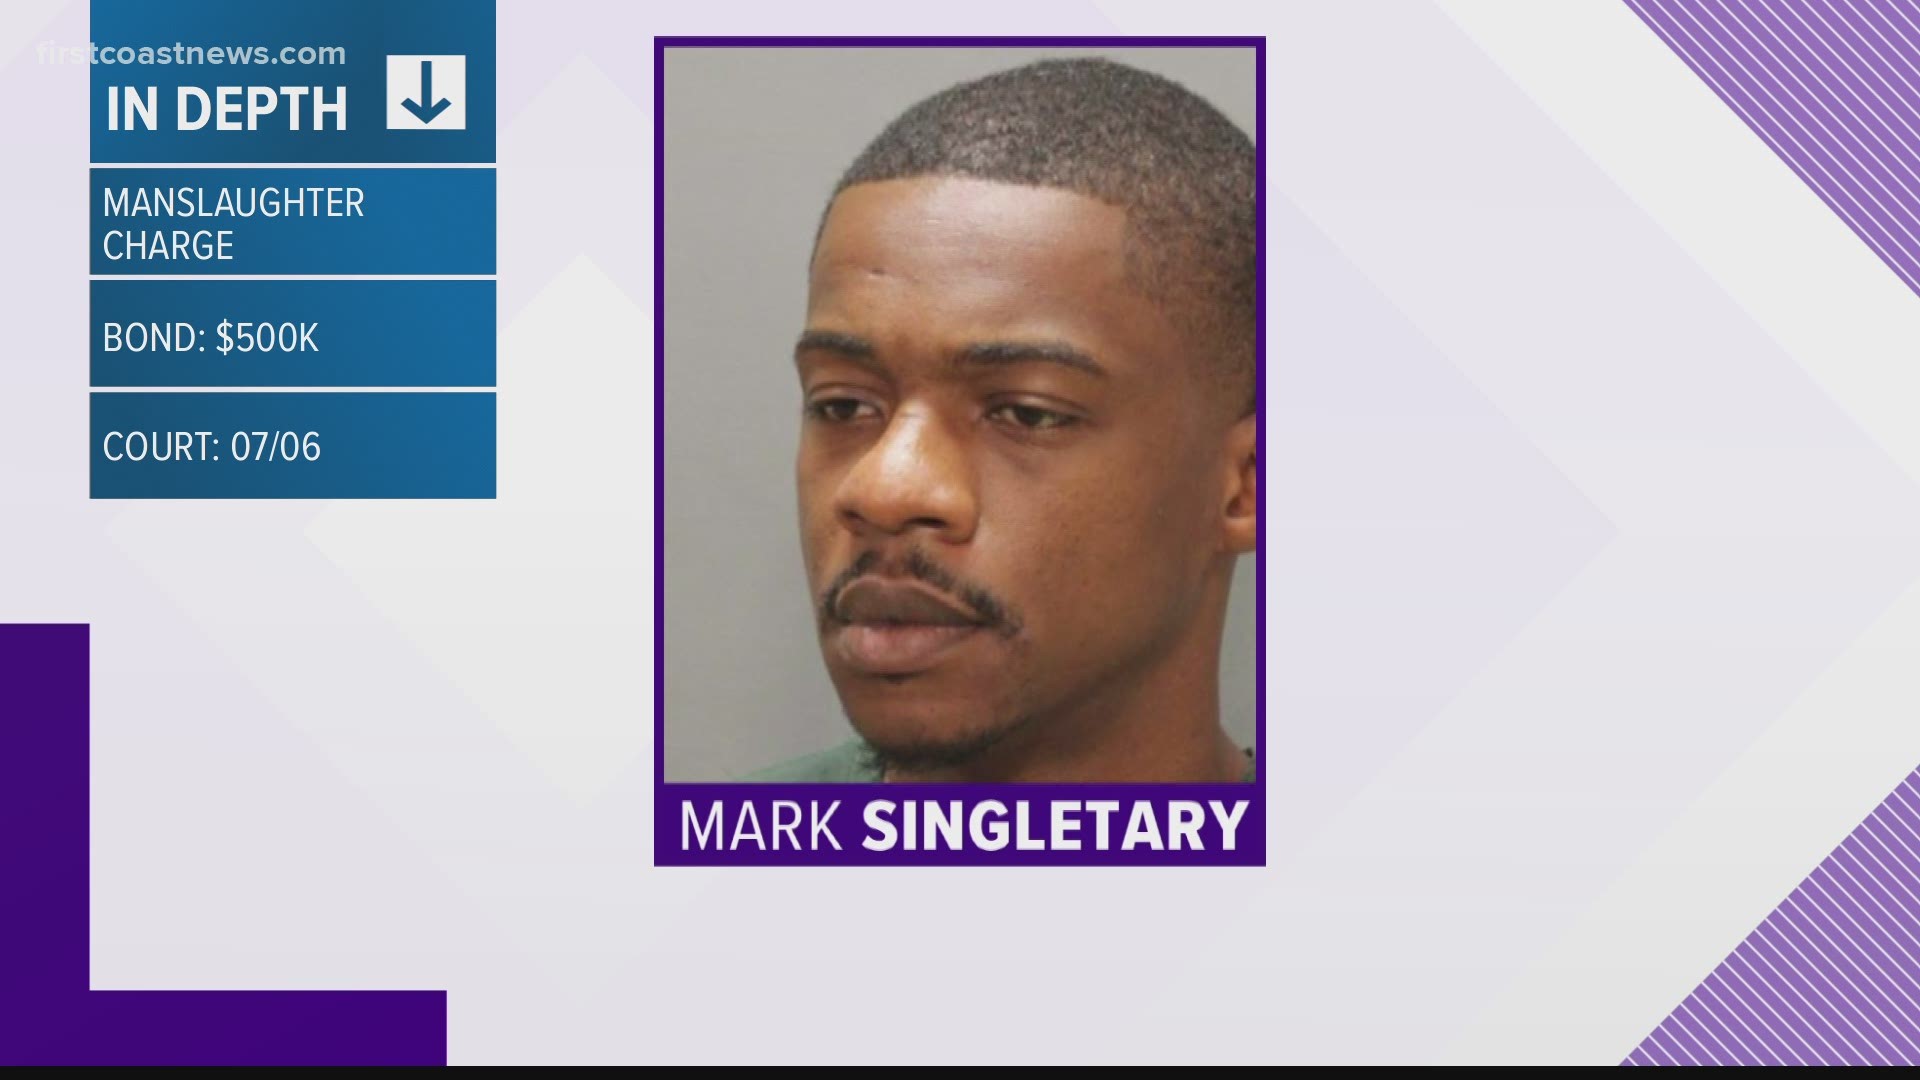 Mark Singletary was arrested over the weekend in the death of a man who allegedly bought drugs from Singletary.